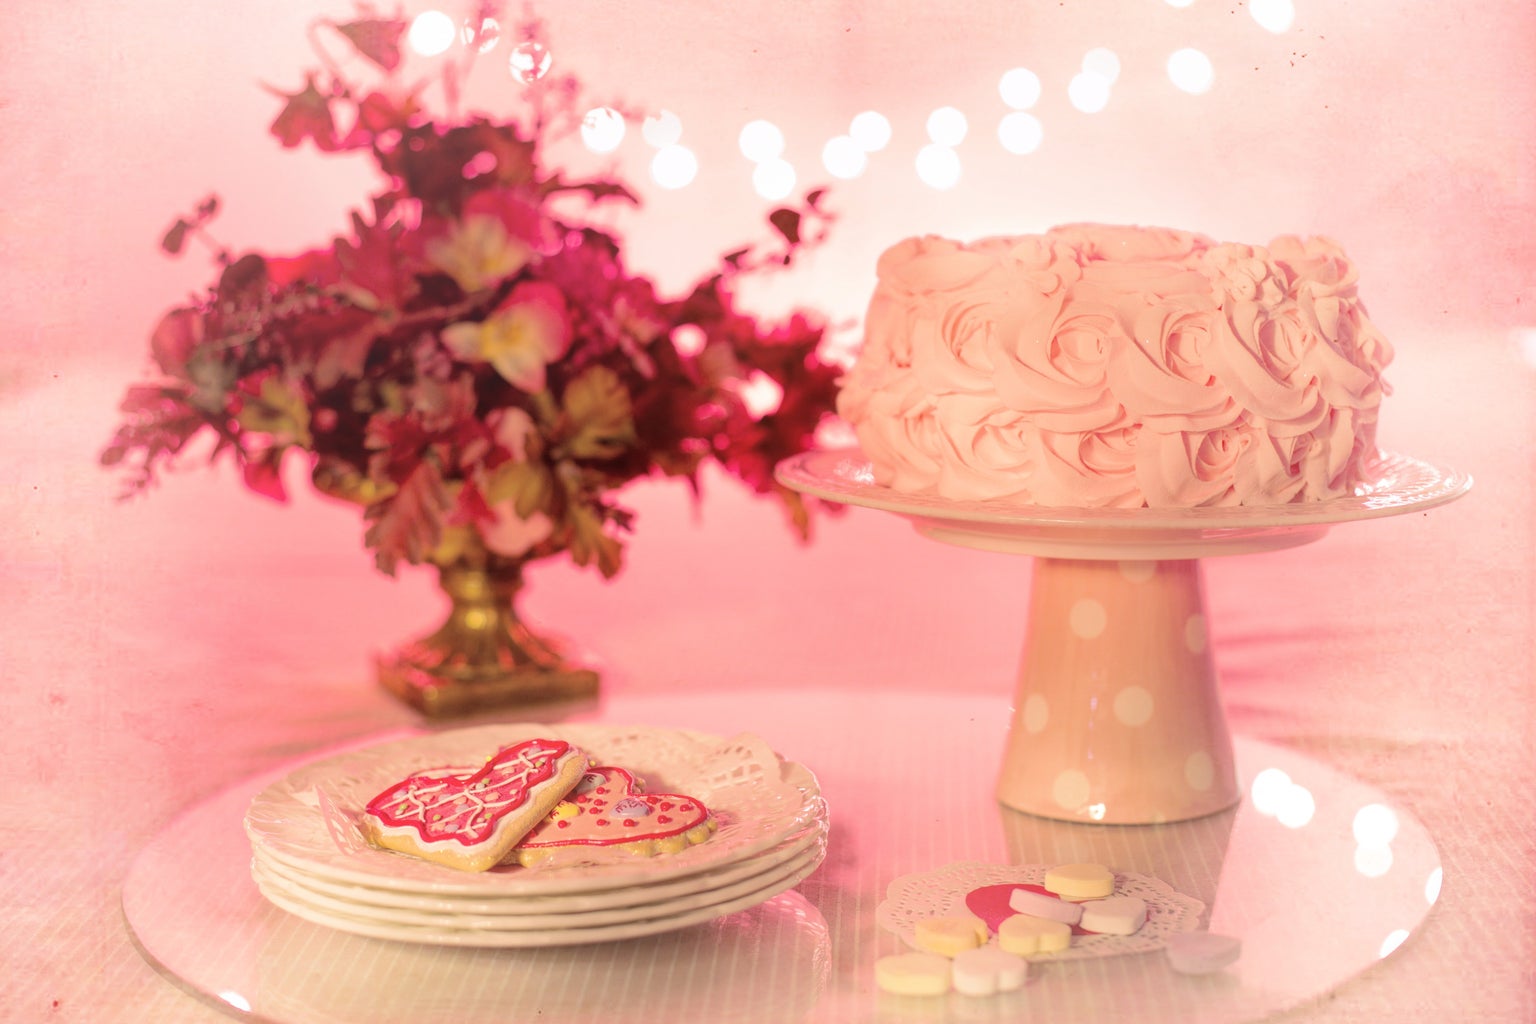 pink icing cake on cake stand valentines